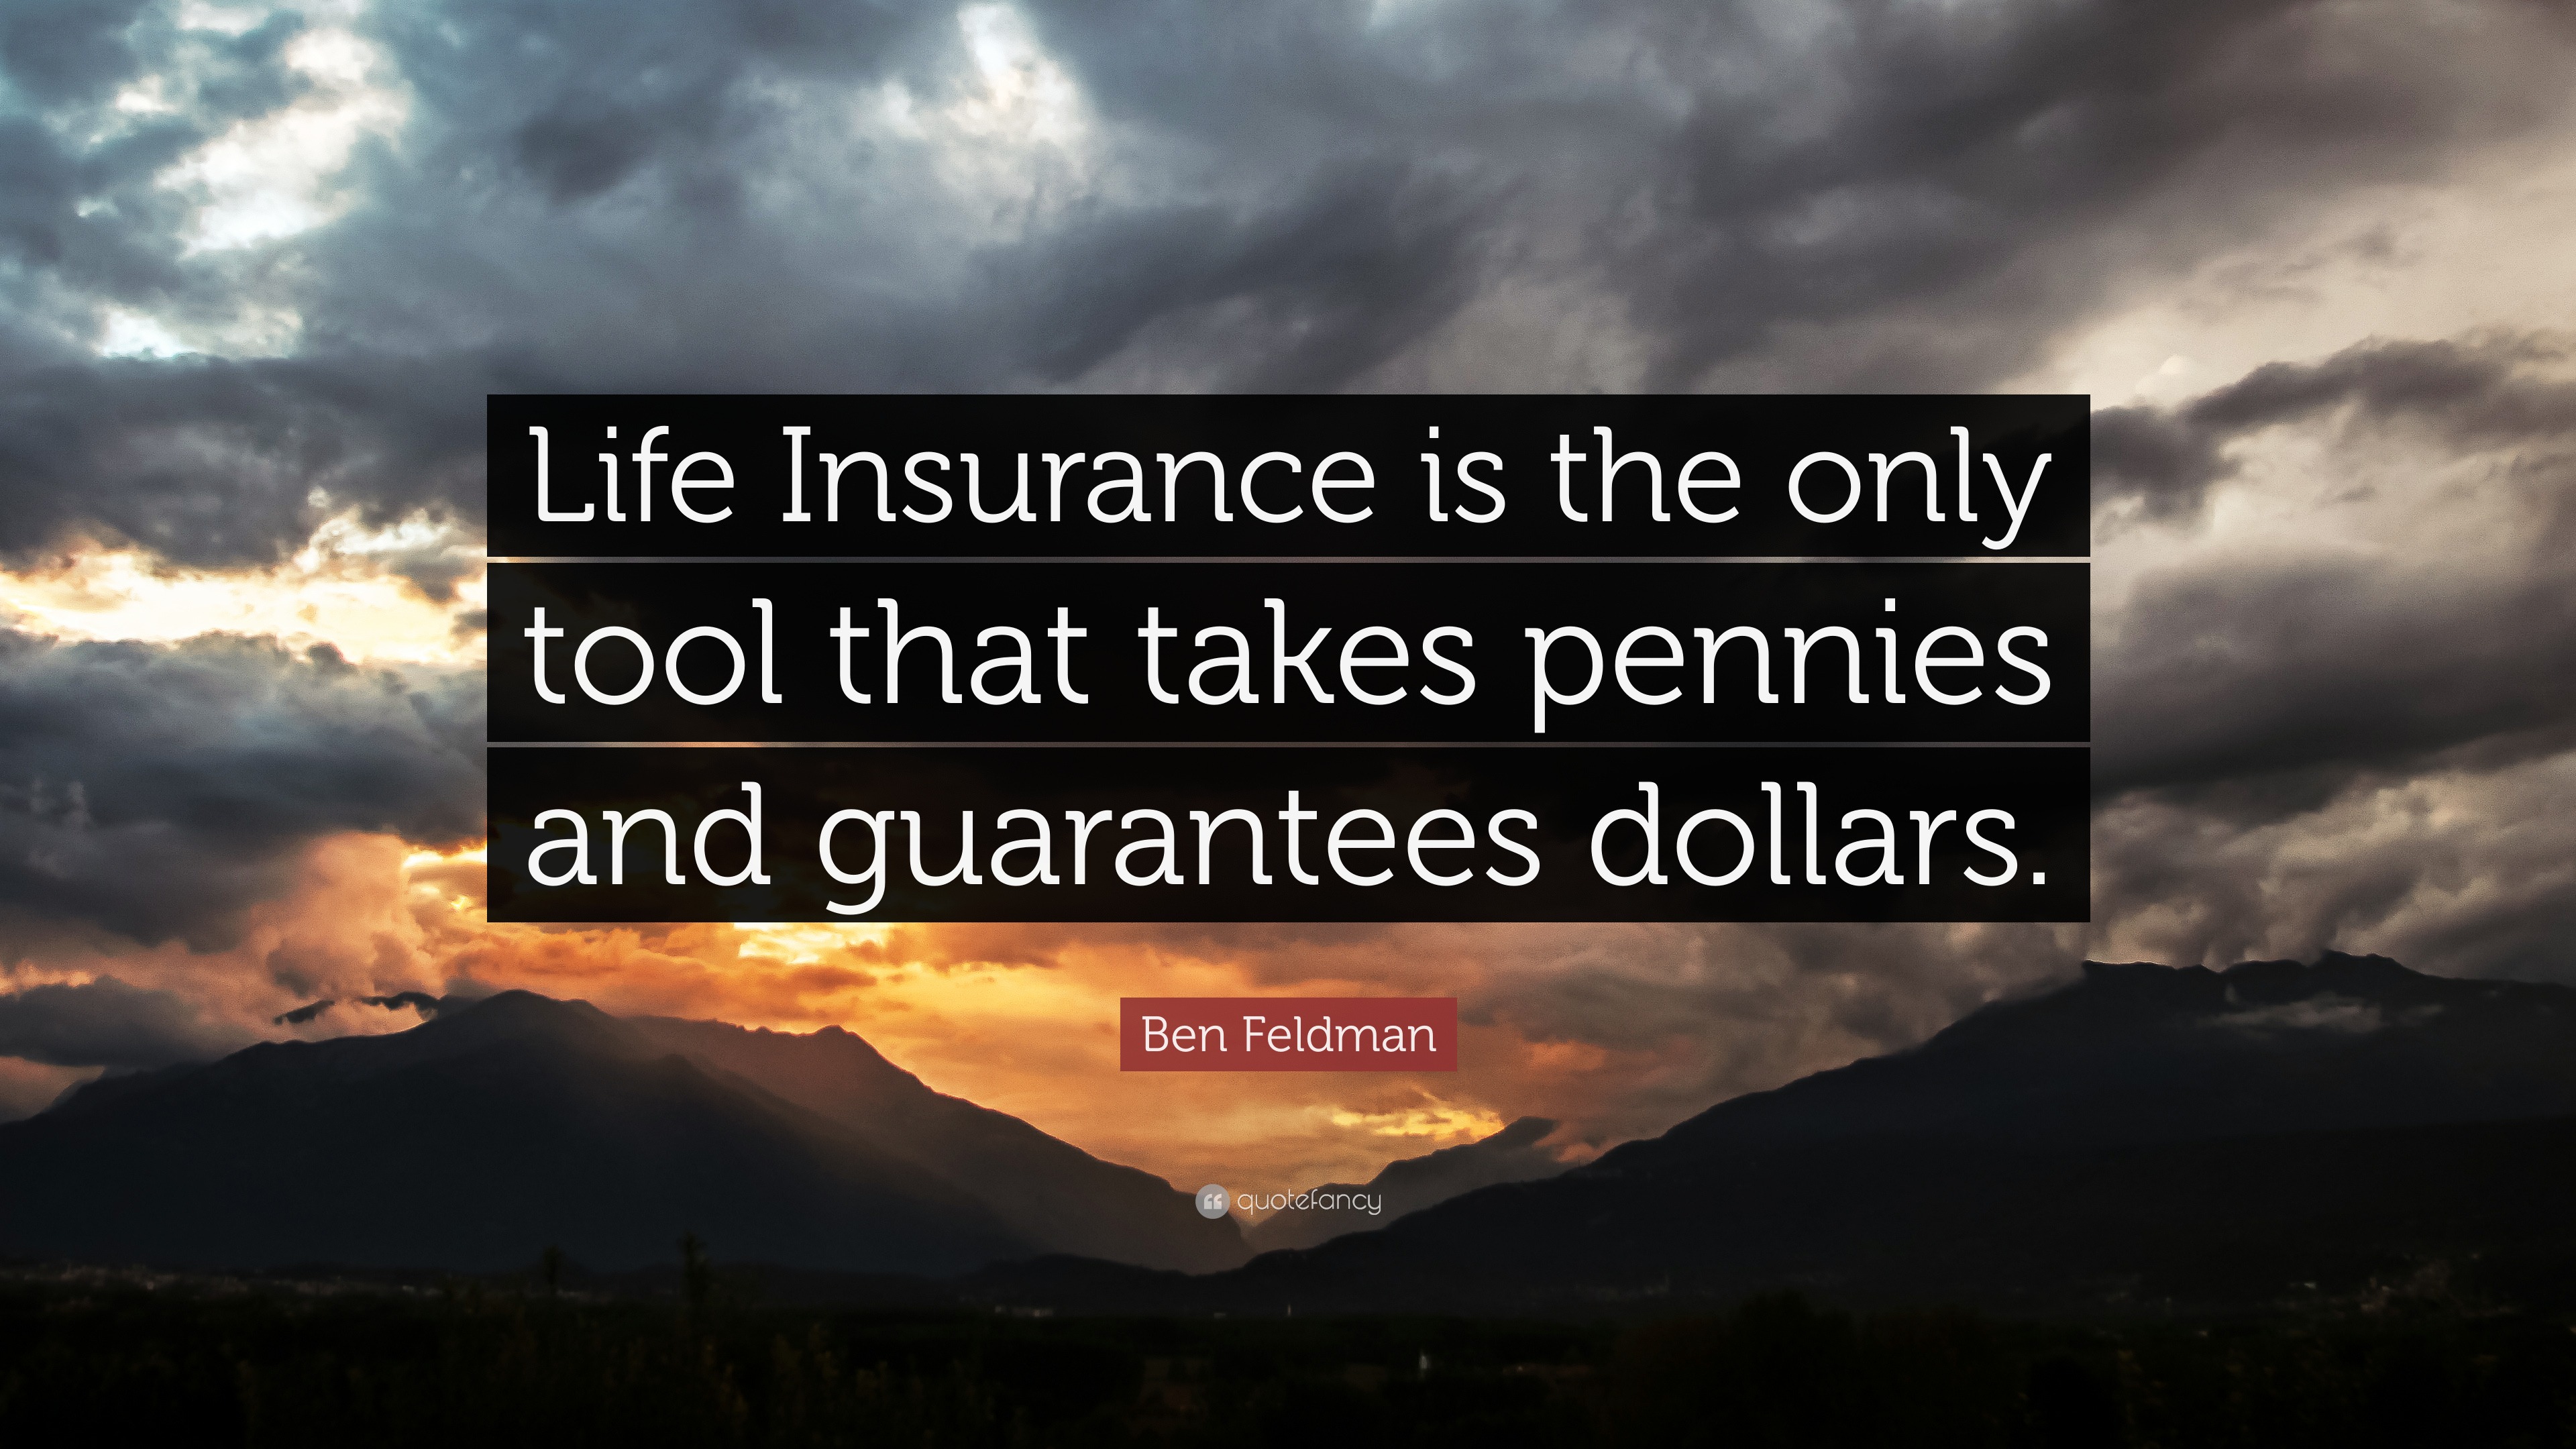 Ben Feldman Quote “Life Insurance is the only tool that